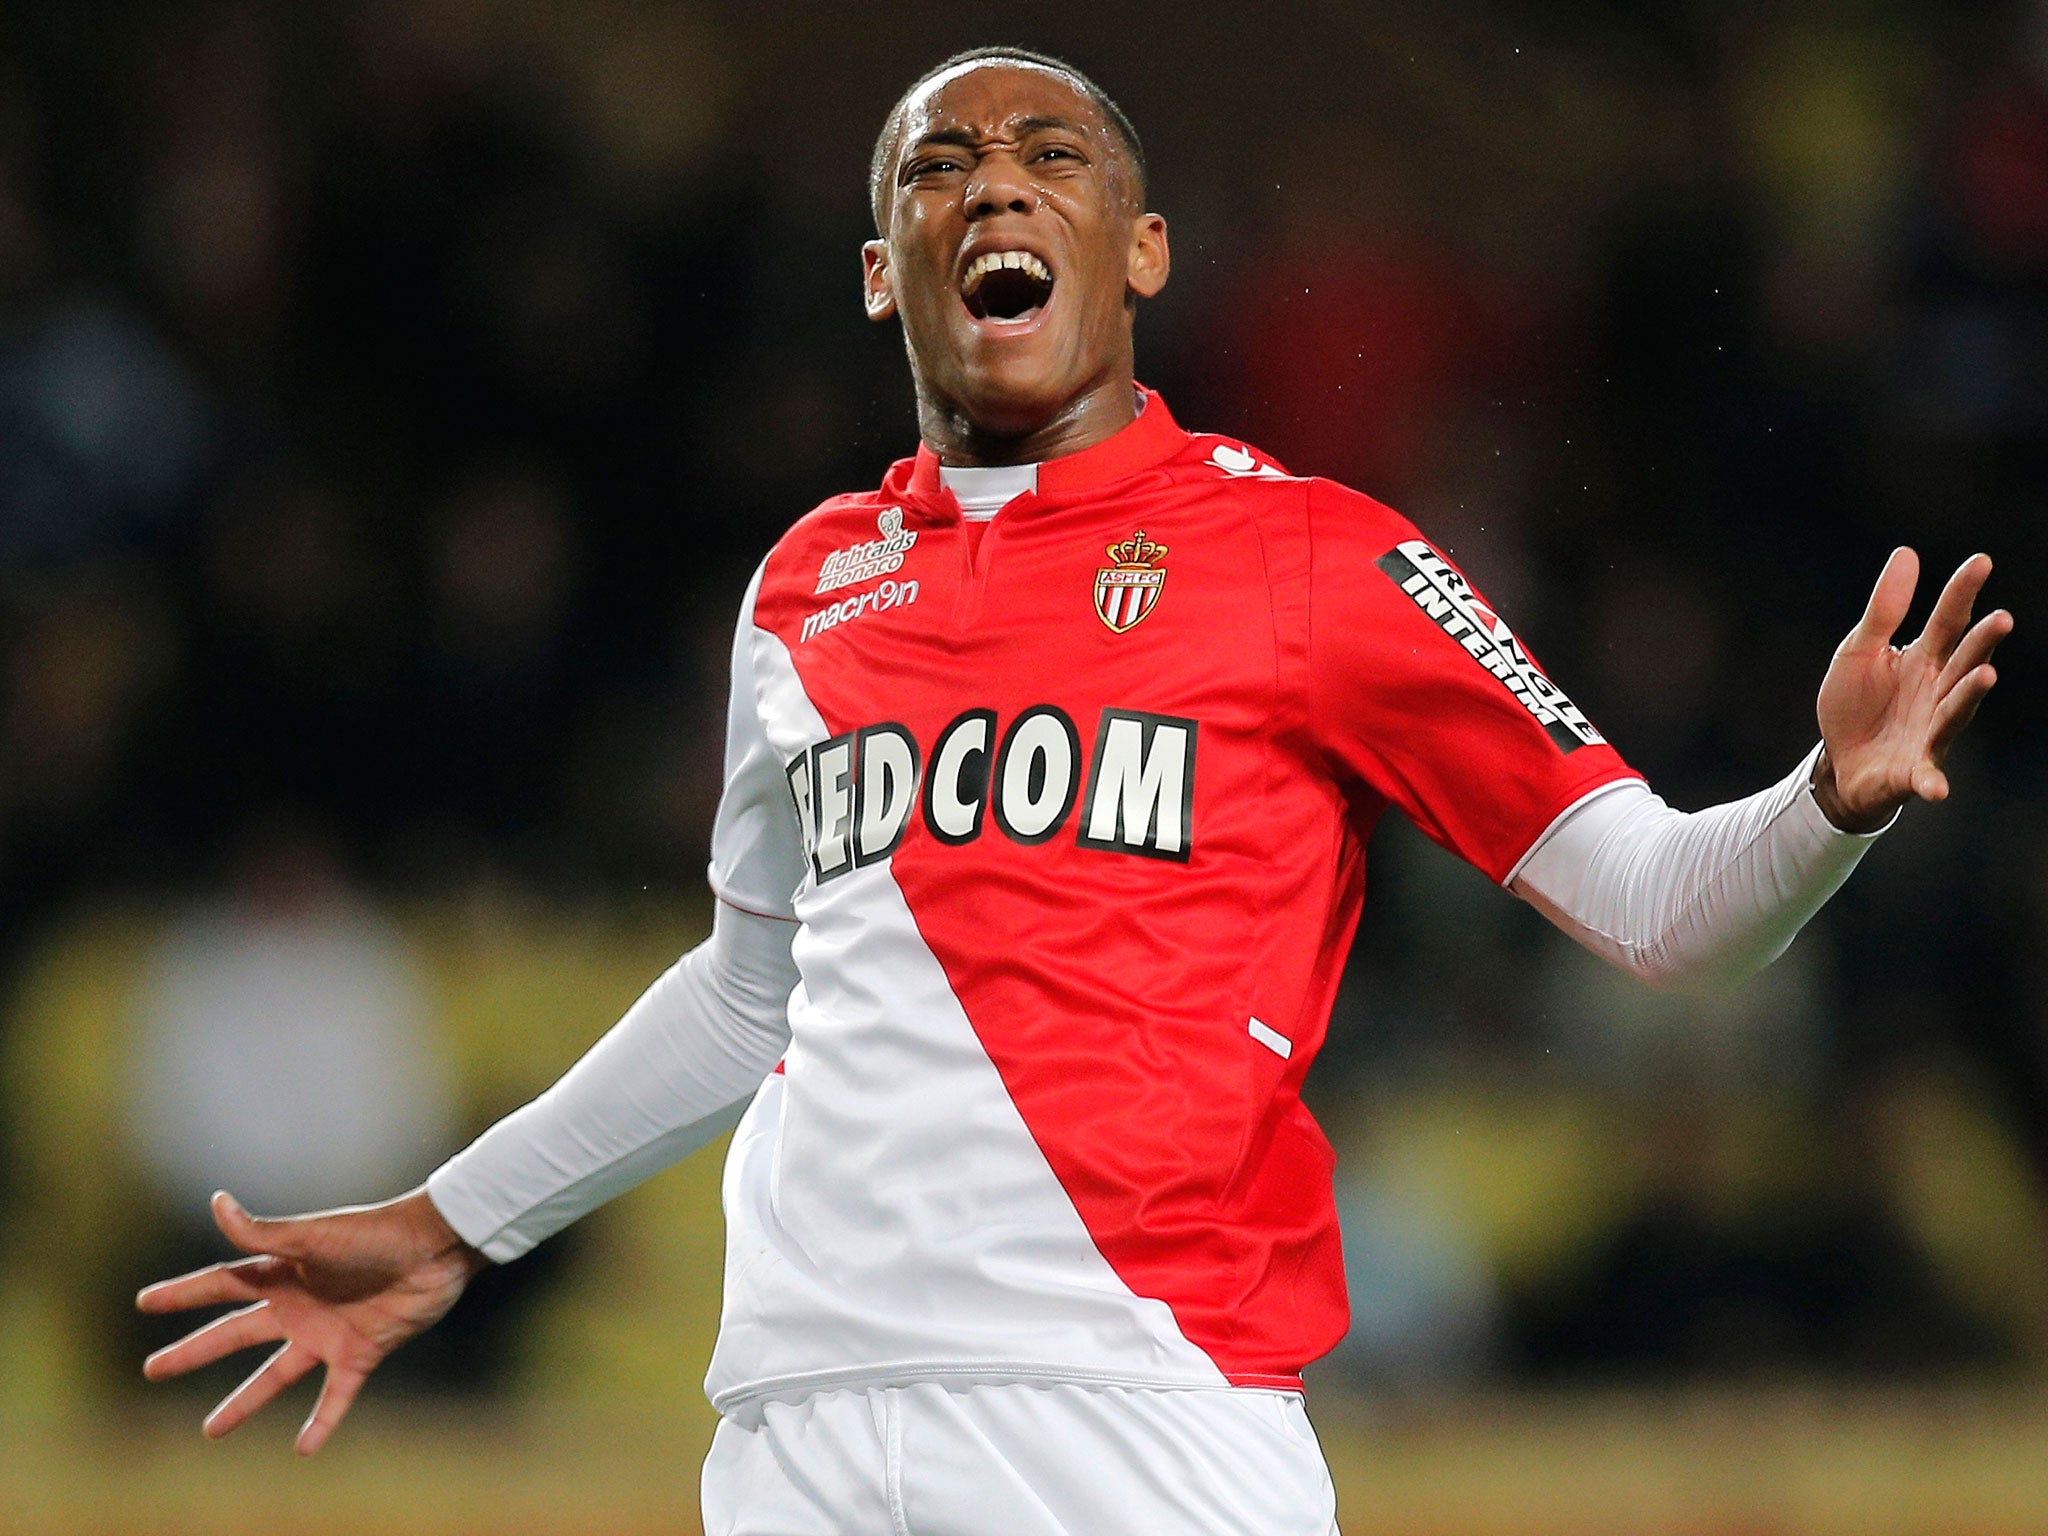 Anthony Martial joins United for the sum of £36m – but that fee could still rise with add-ons